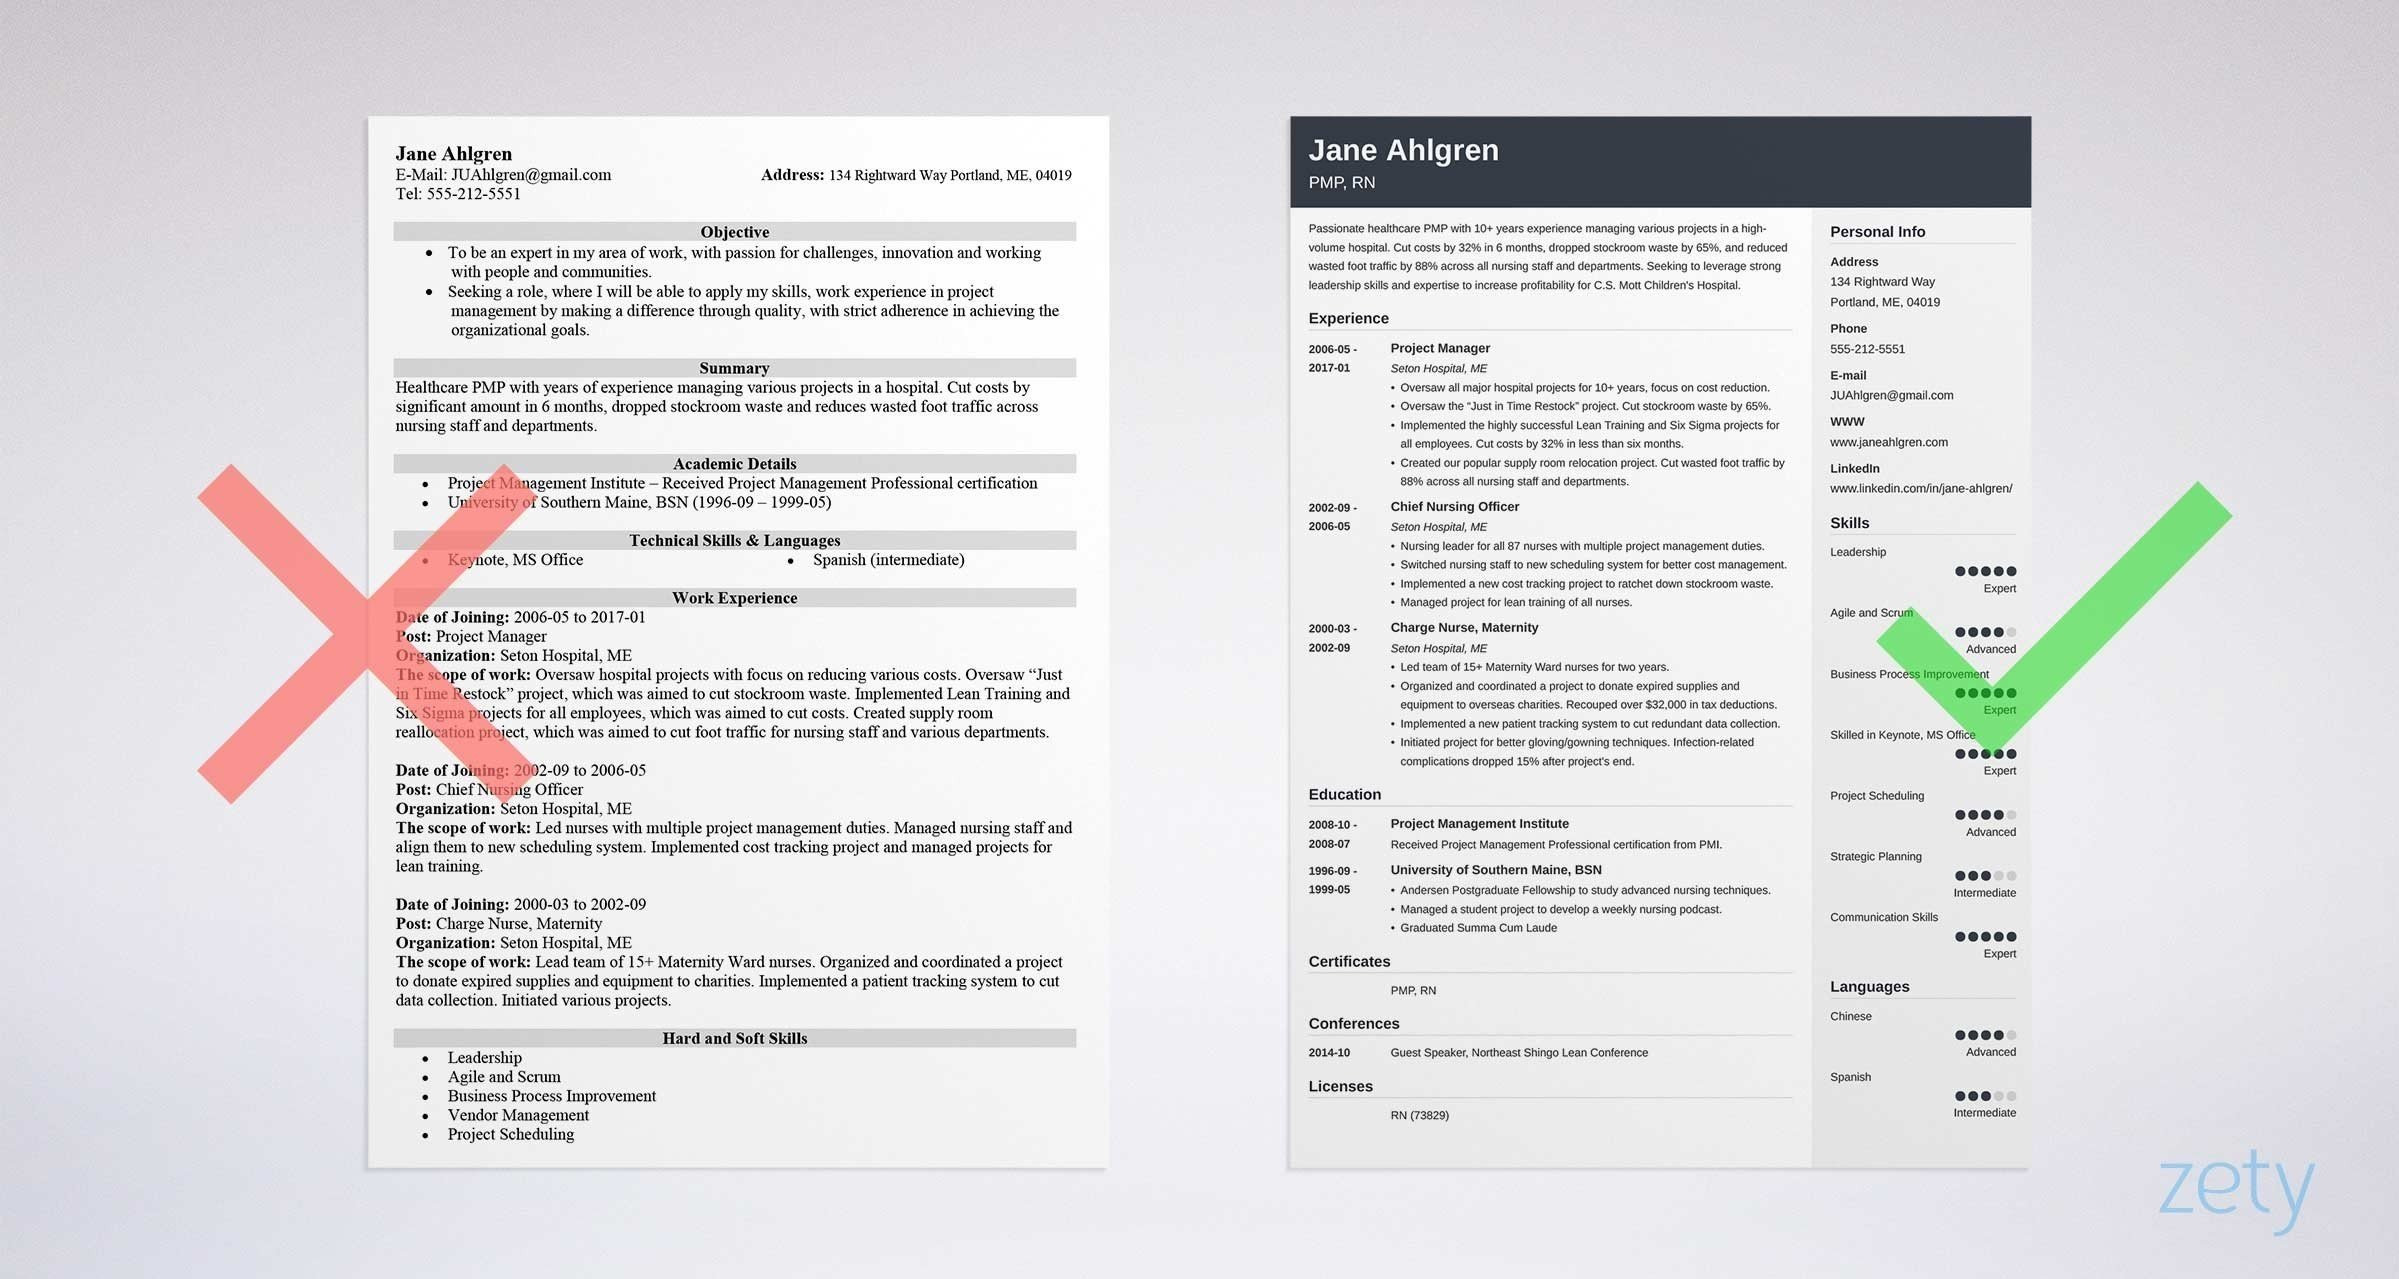 Sample Resume with Reasons for Leaving How to Quit A Job & Tell Your Boss You’re Leaving (examples)